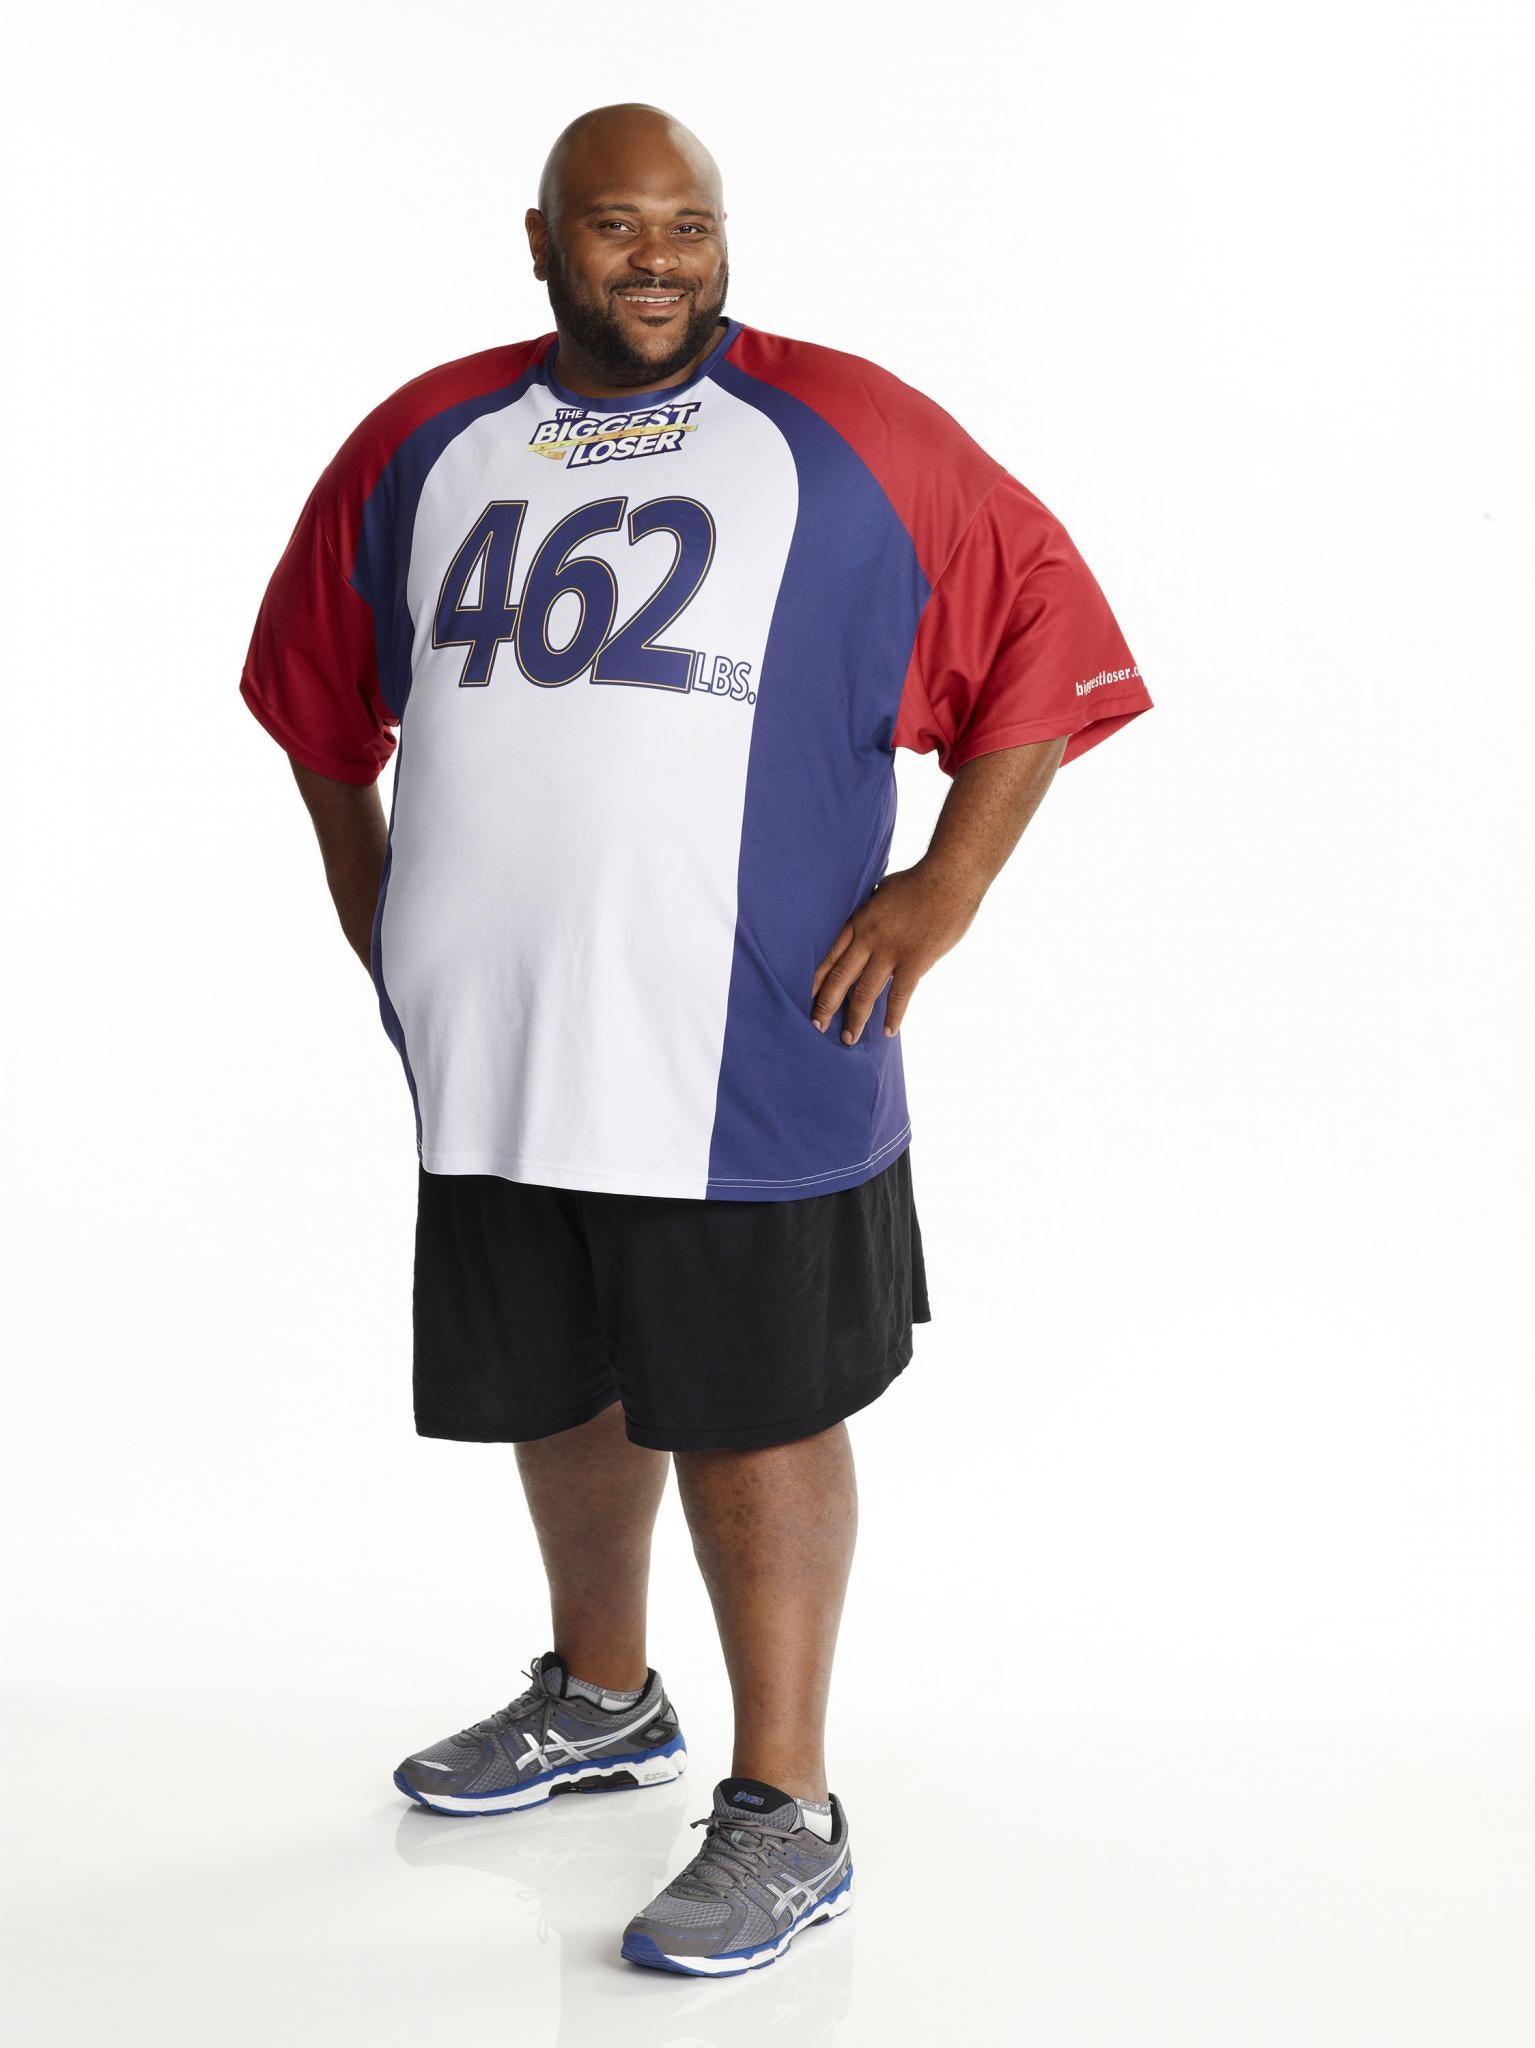 Ruben Studdard Diagnosed with Diabetes on 'Biggest Loser'